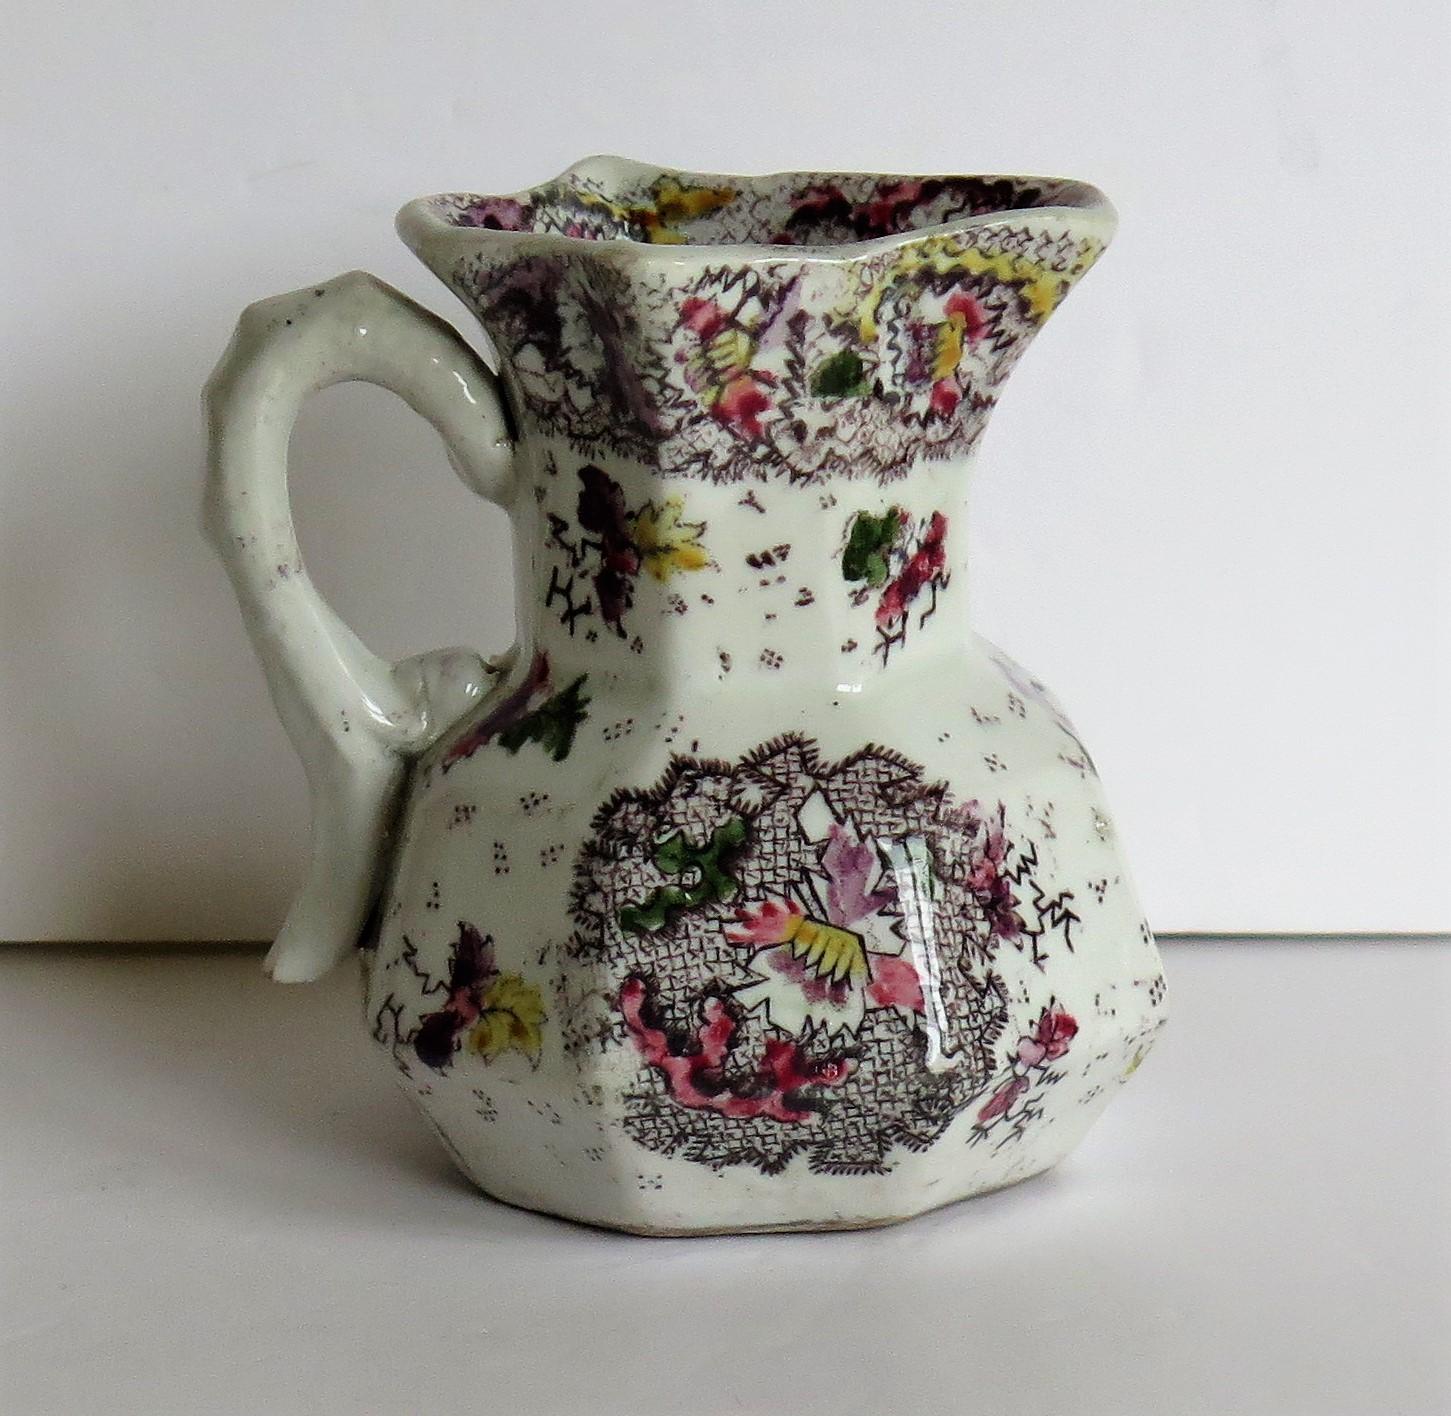 This is a good, Mason's ironstone hydra jug with a snake handle in the Cashmire De Thibet pattern dating to the William 1Vth English 19th century period, circa 1832-1836

The jug has an octagonal hydra shape with a snake handle.

This pattern is